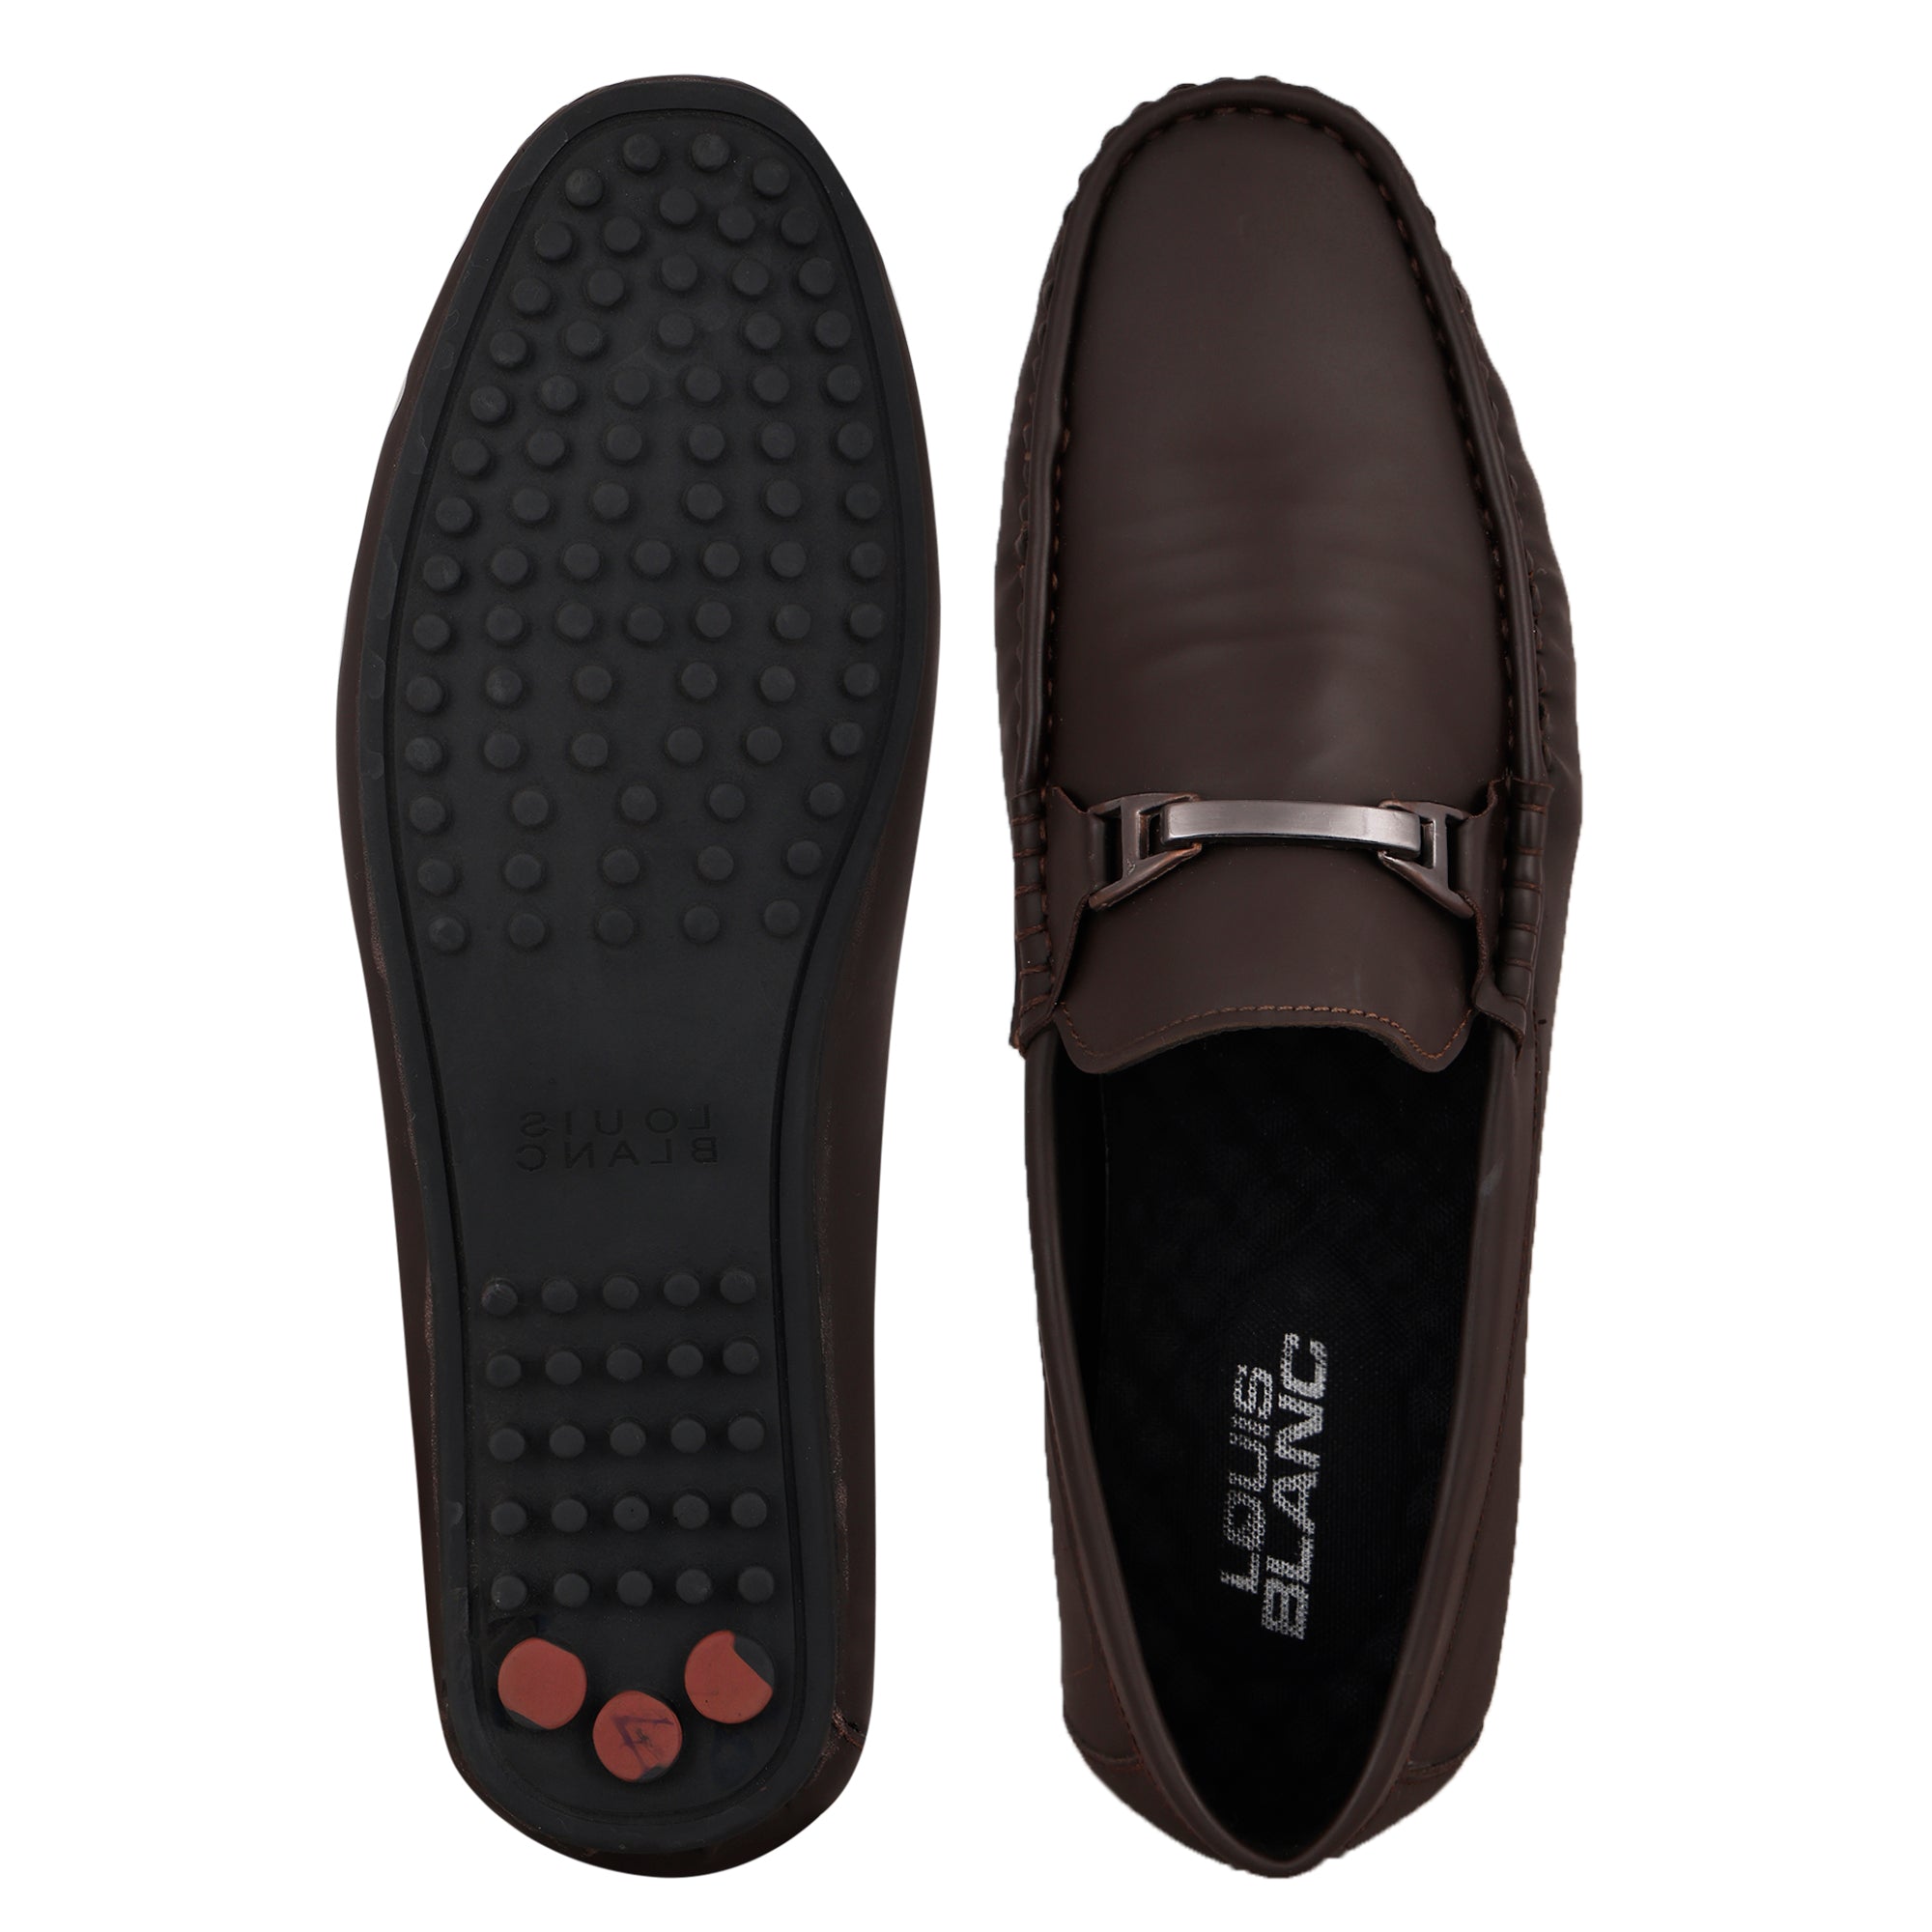 LB 39A Men's Brunette Brown Slip On Style Loafer Most Comfortable Doctor Insole With Wrinkle Free Fox Leather Loafers.